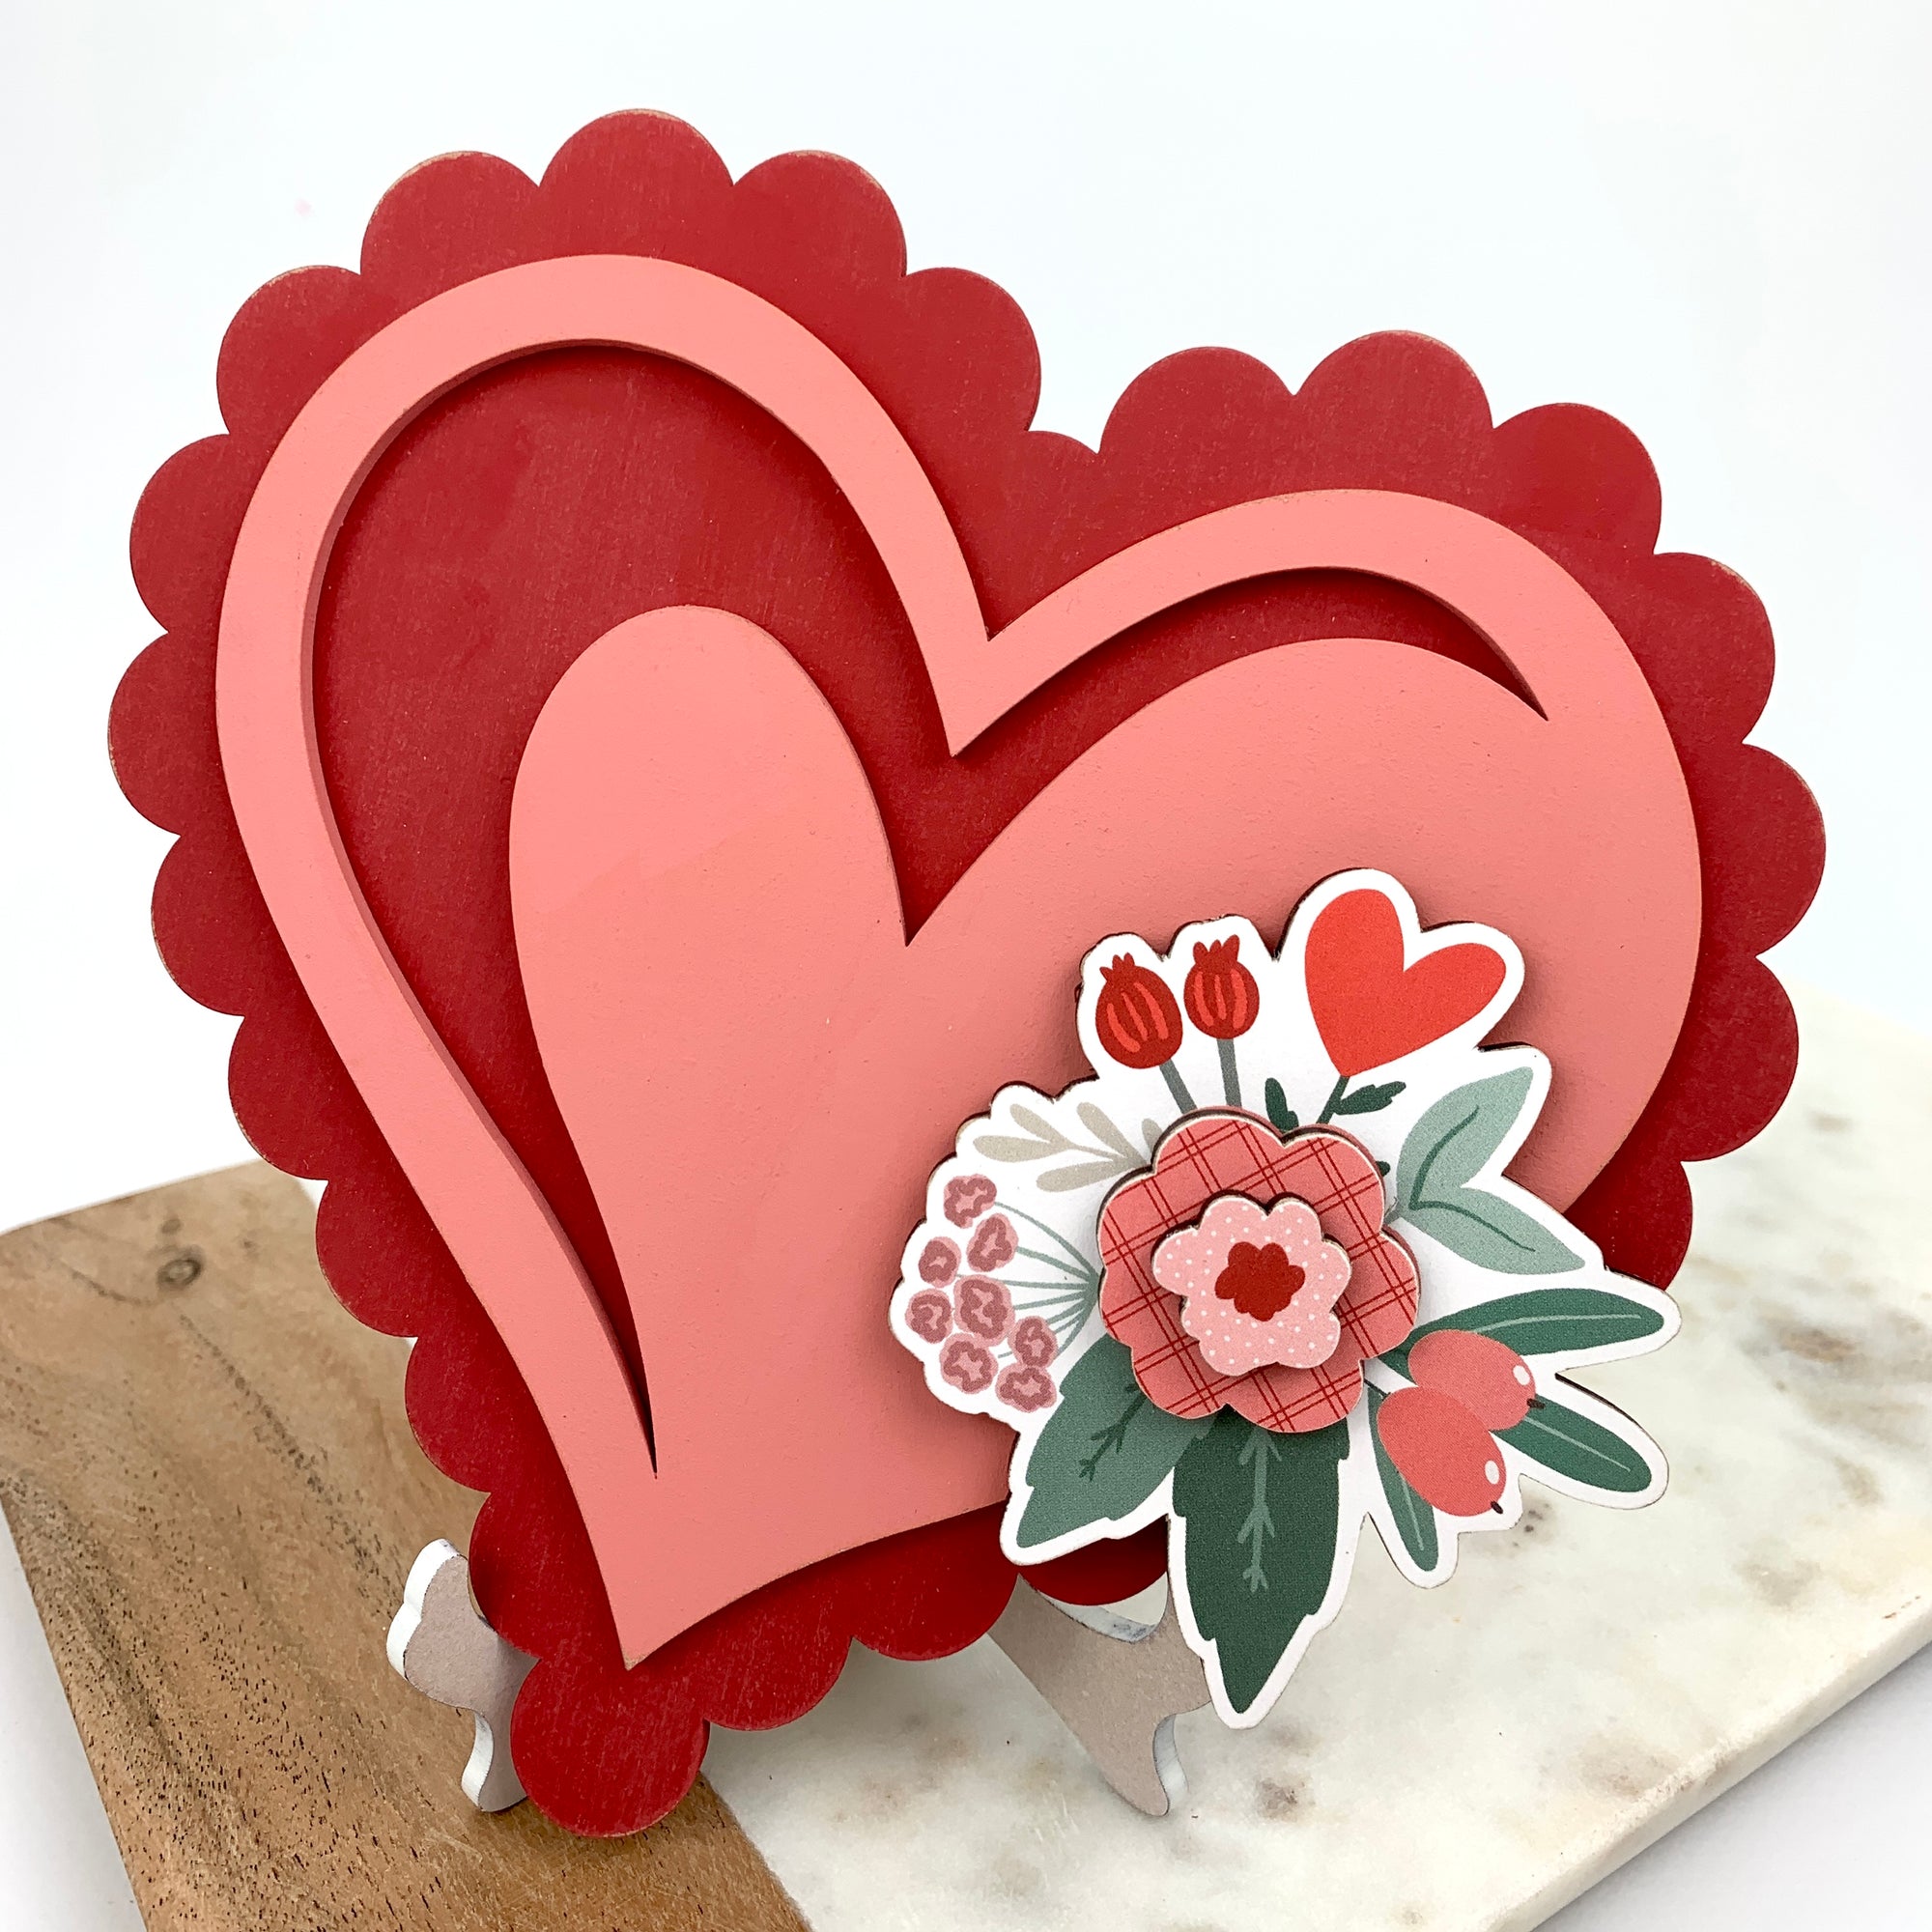 Red and pink layered scallop edged heart with flowers for seasonal porch welcome sign